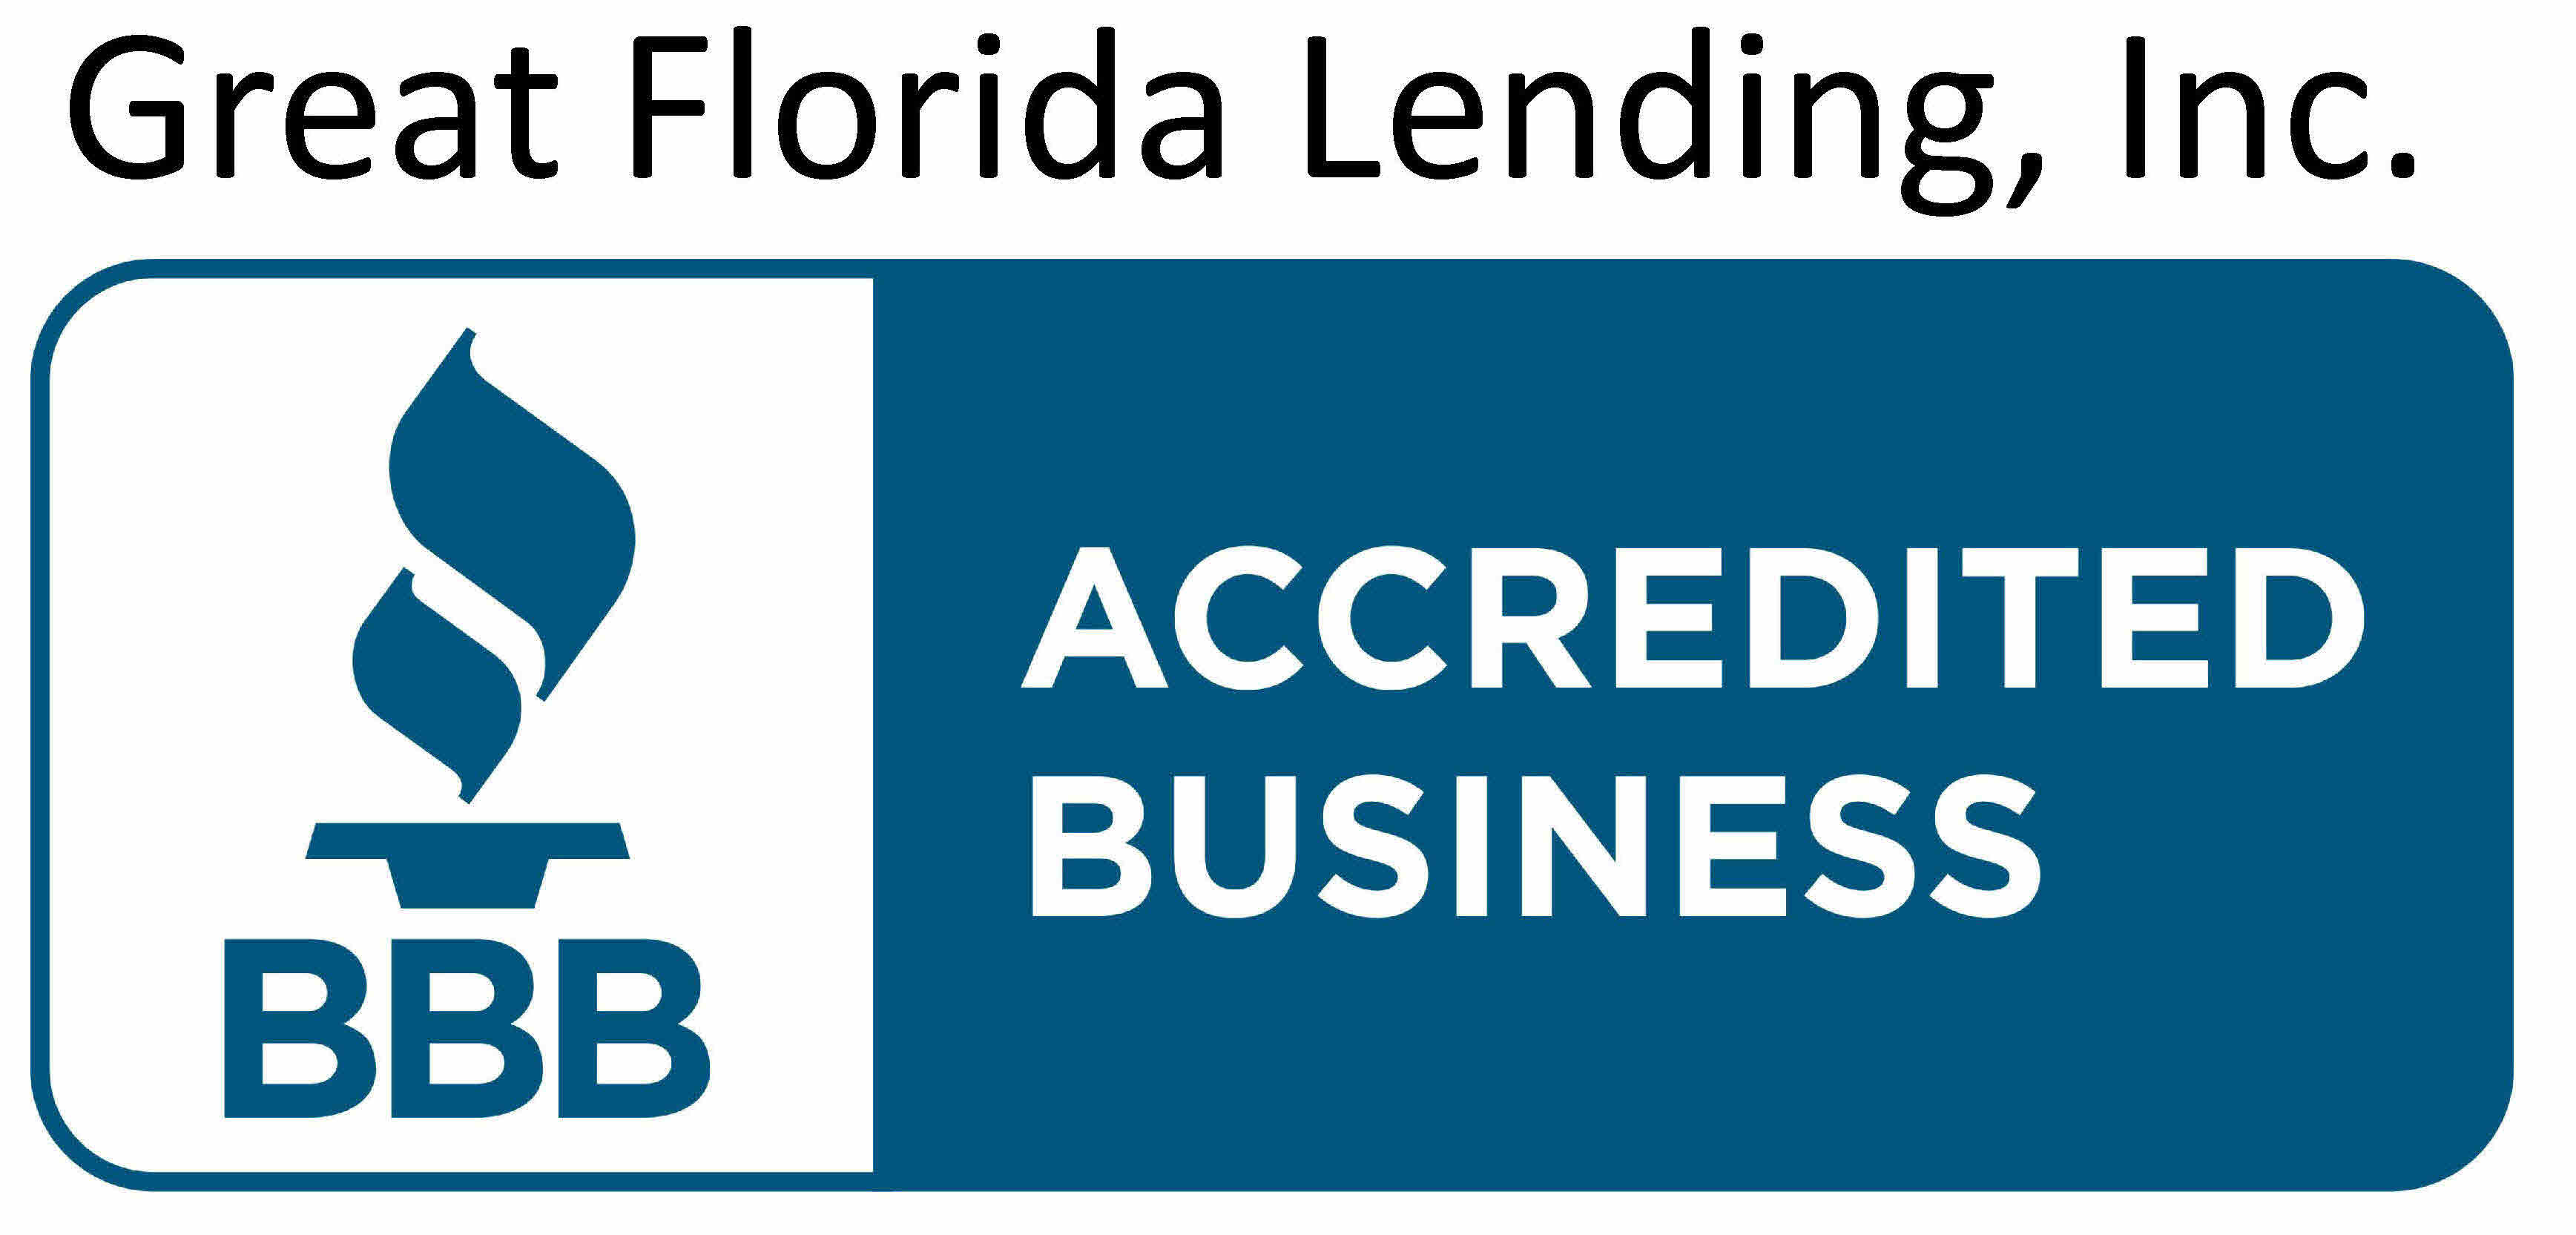 [FLORIDA] mortgages : [FLORIDA] 1099 Two Years Special Loan Program For the Self Employed and Contract Employees